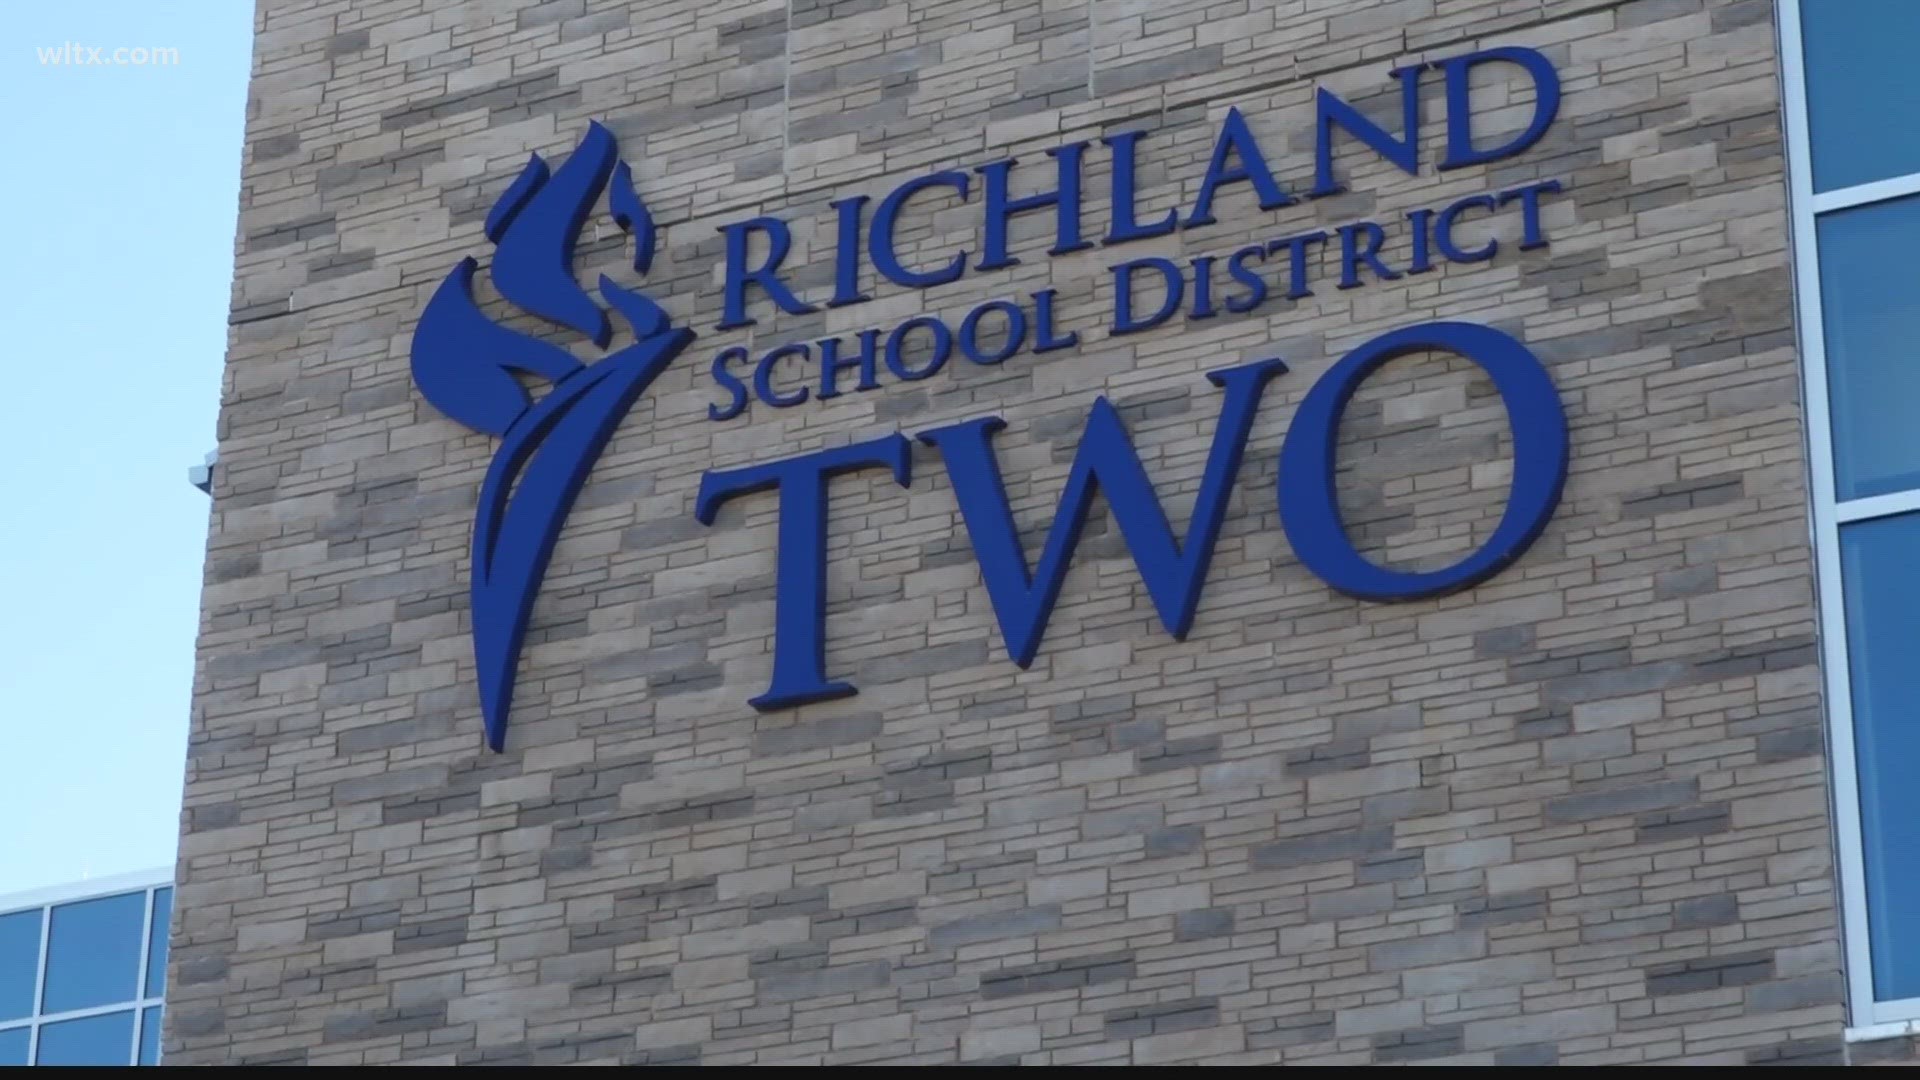 Former Richland Two superintendent Baron Davis, who works for the firm, will not be involved in the search, officials say.